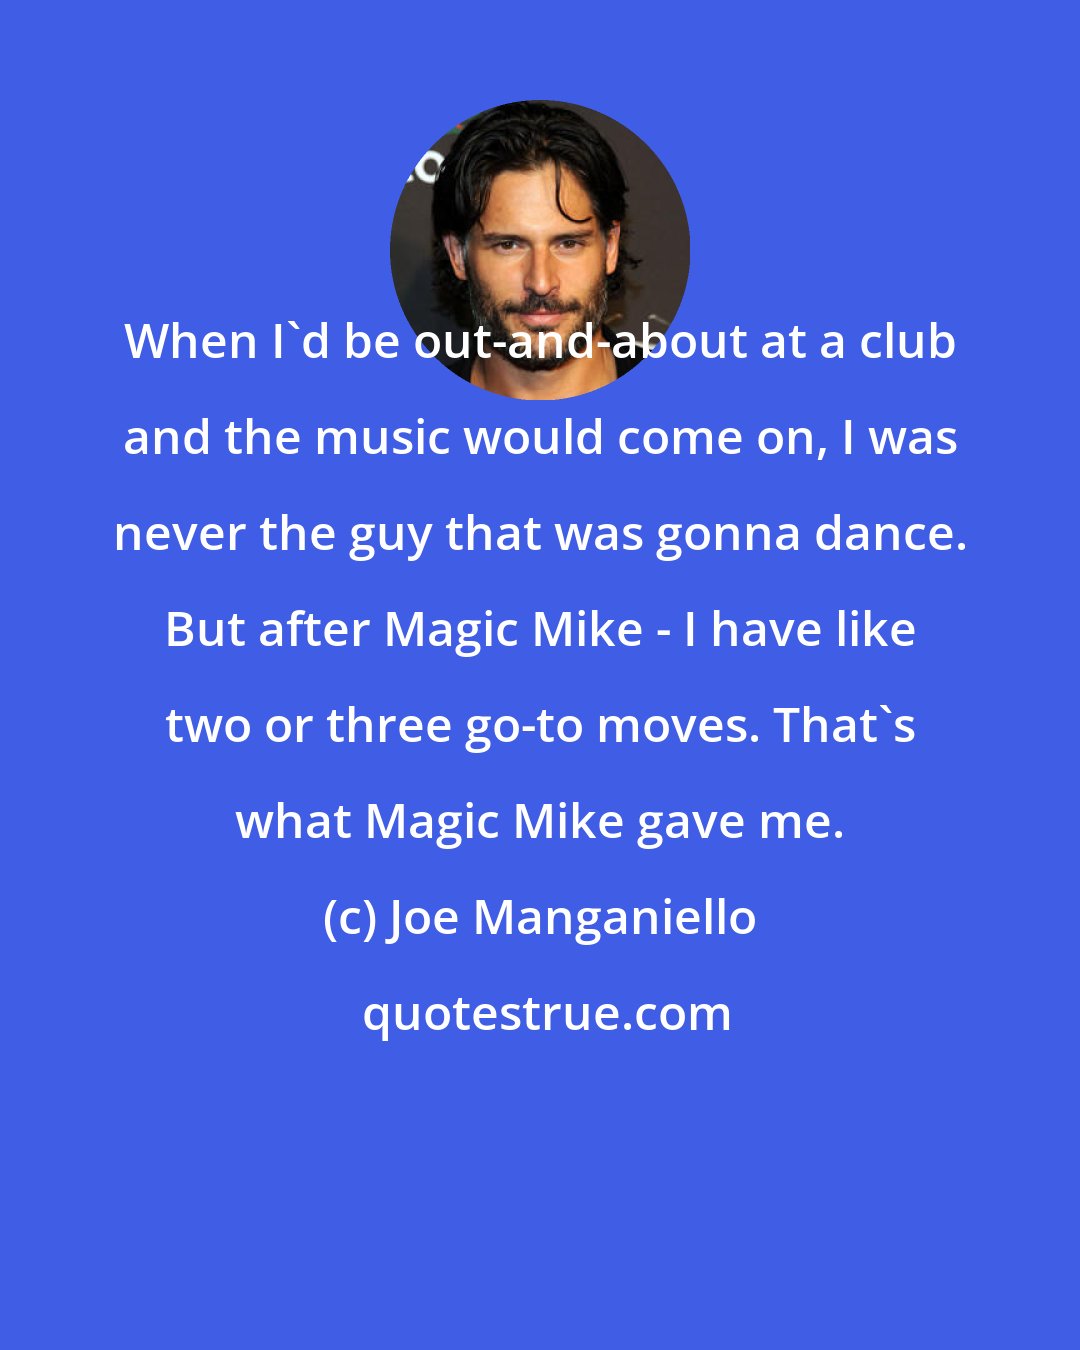 Joe Manganiello: When I'd be out-and-about at a club and the music would come on, I was never the guy that was gonna dance. But after Magic Mike - I have like two or three go-to moves. That's what Magic Mike gave me.